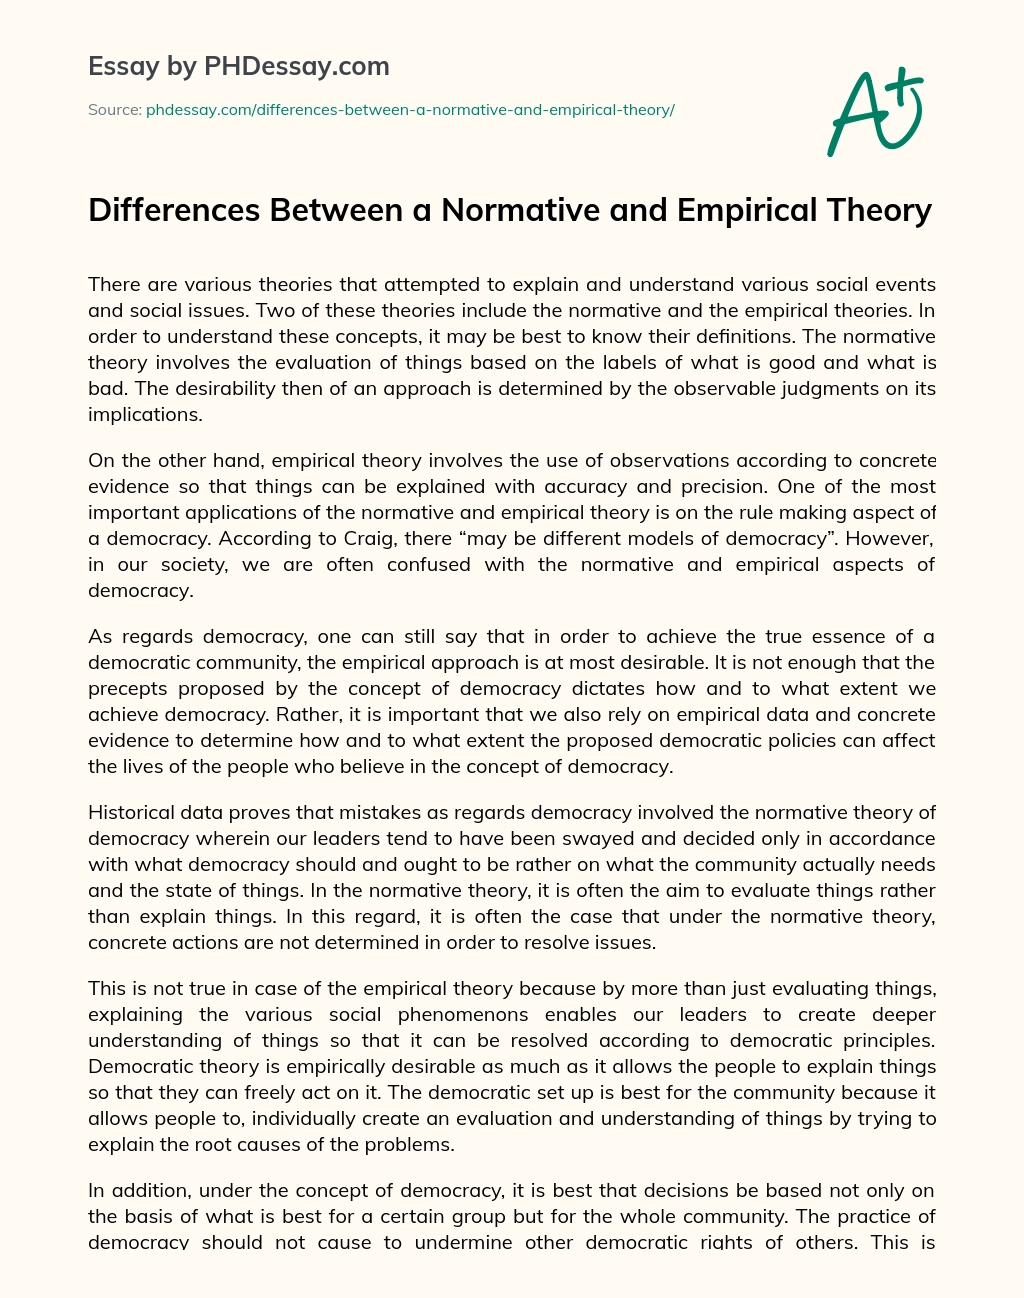 Differences Between a Normative and Empirical Theory essay